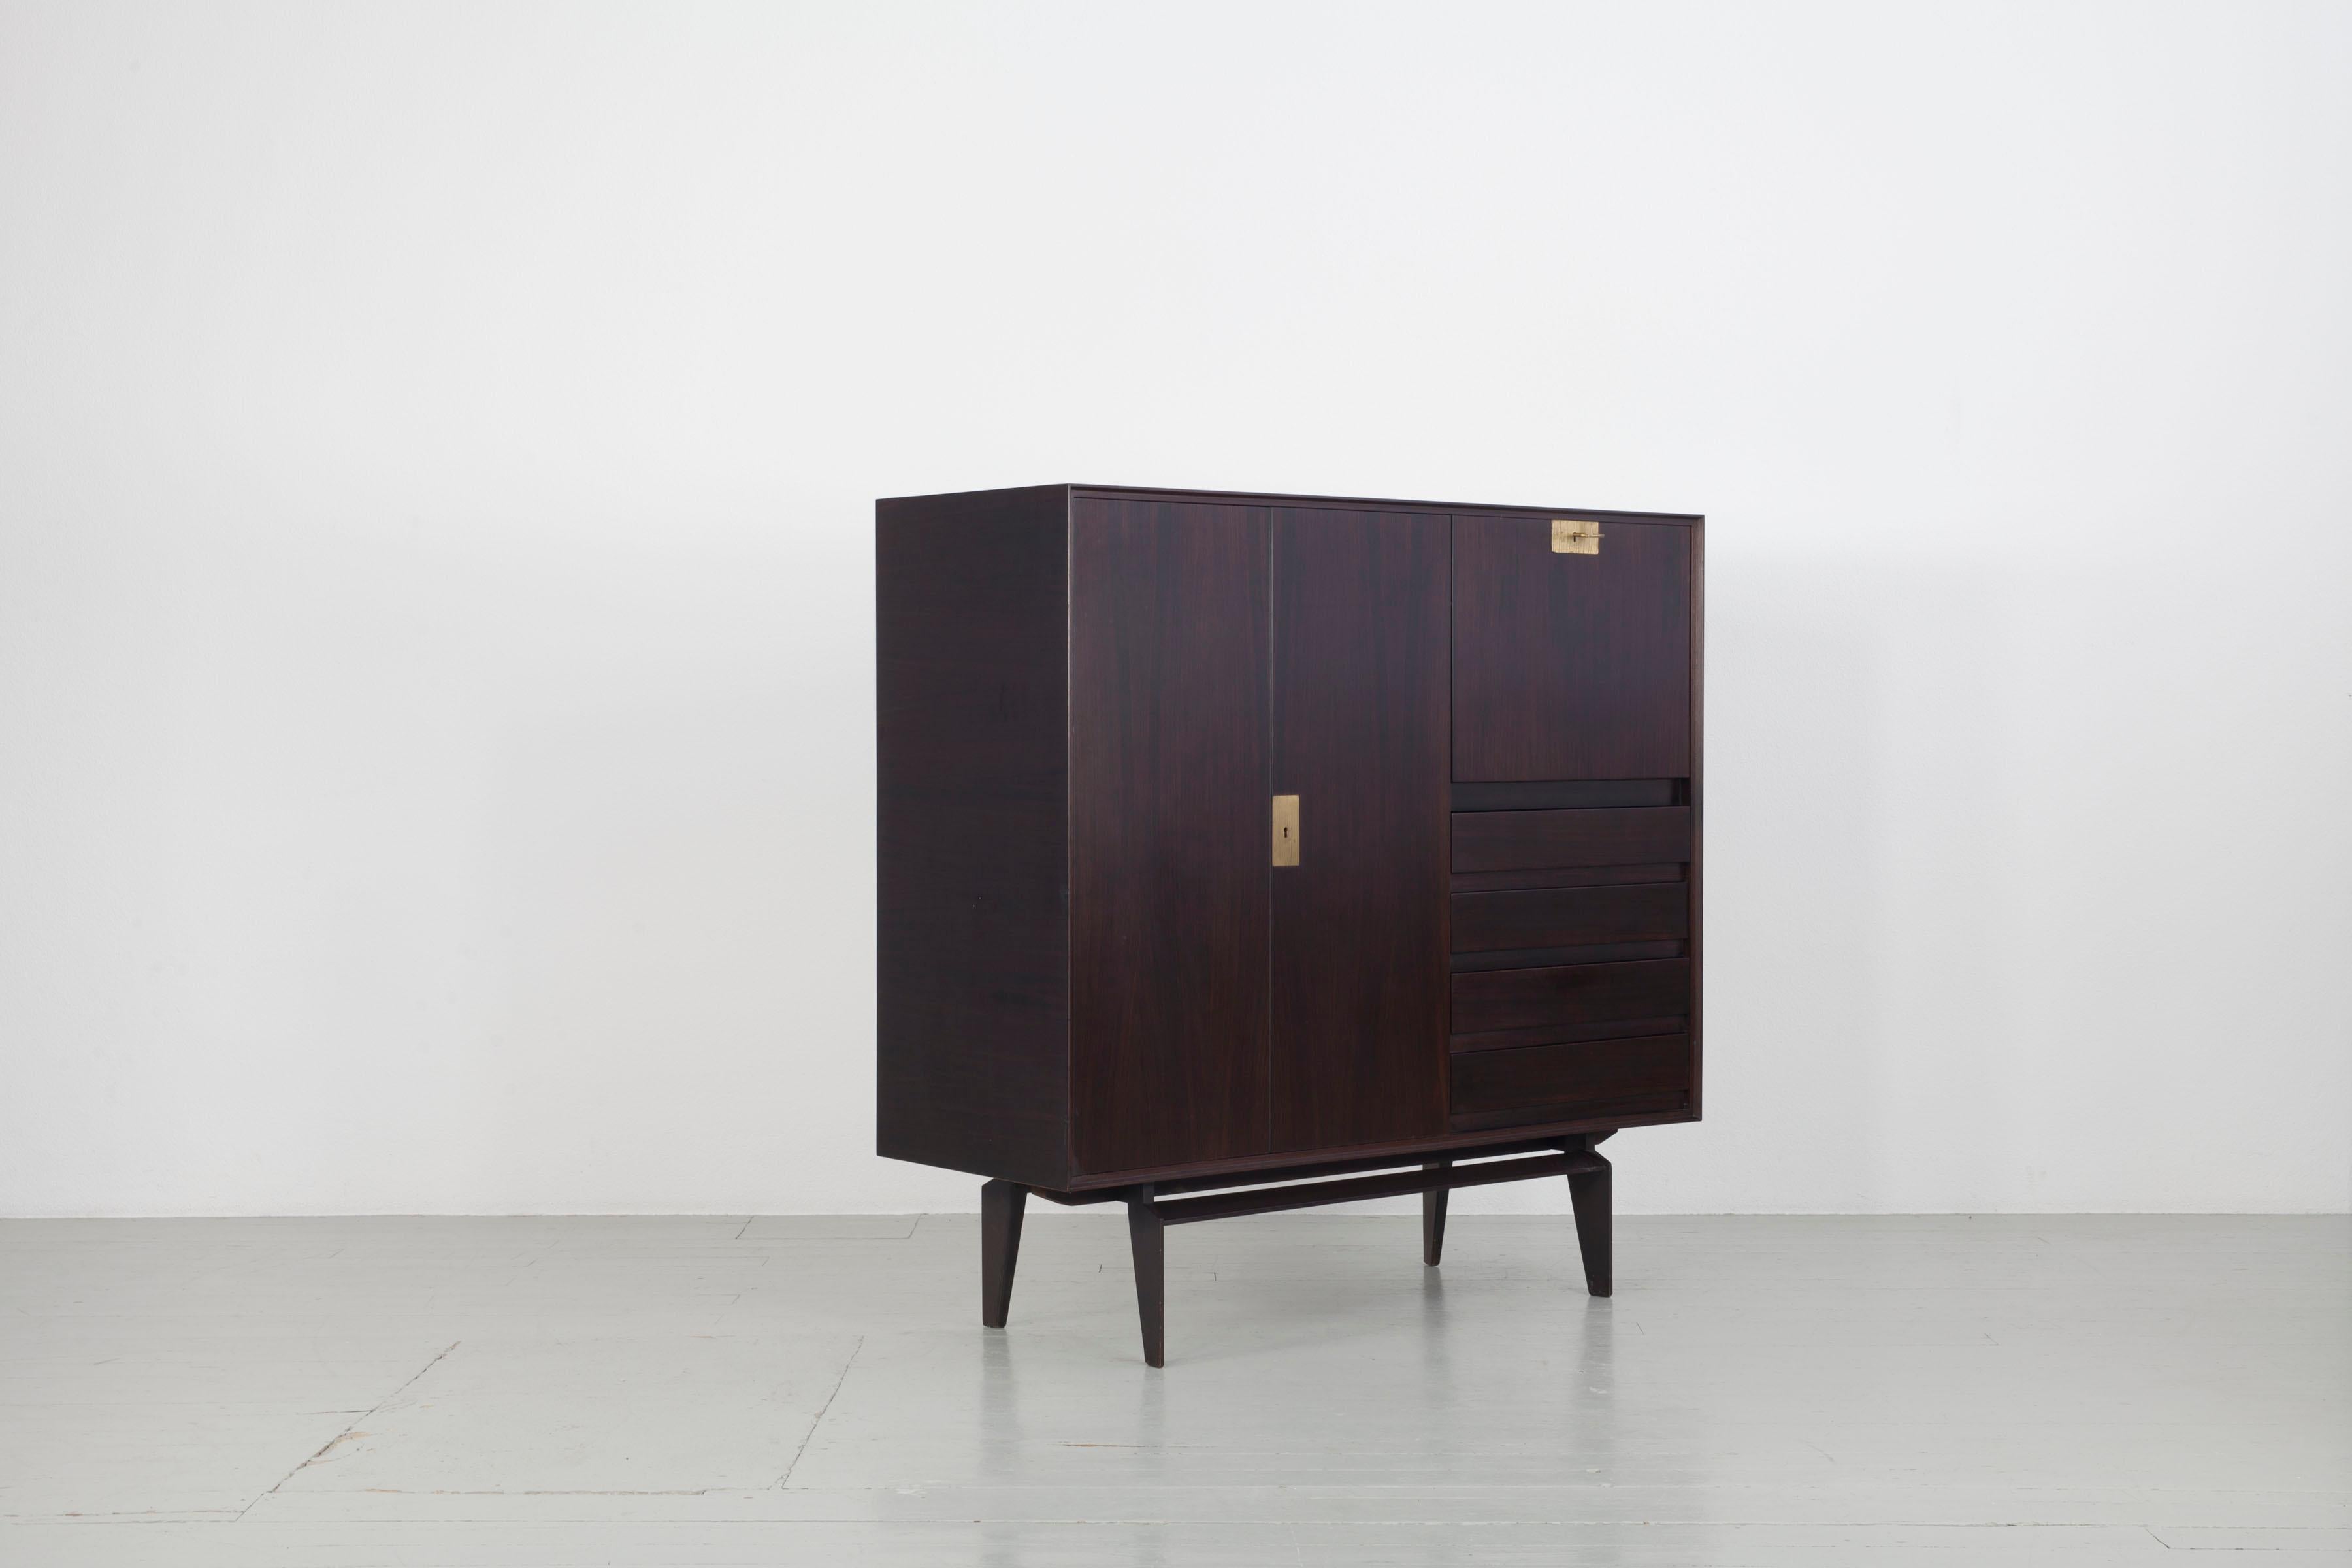 Edmondo Palutari Dassi highboard
This sideboard has been crafted with Rosewood and brass detailing. The drop-leaf door on the right hand side allows the sideboard to also function as a secretaire. The versatile sideboard offers plenty of room for